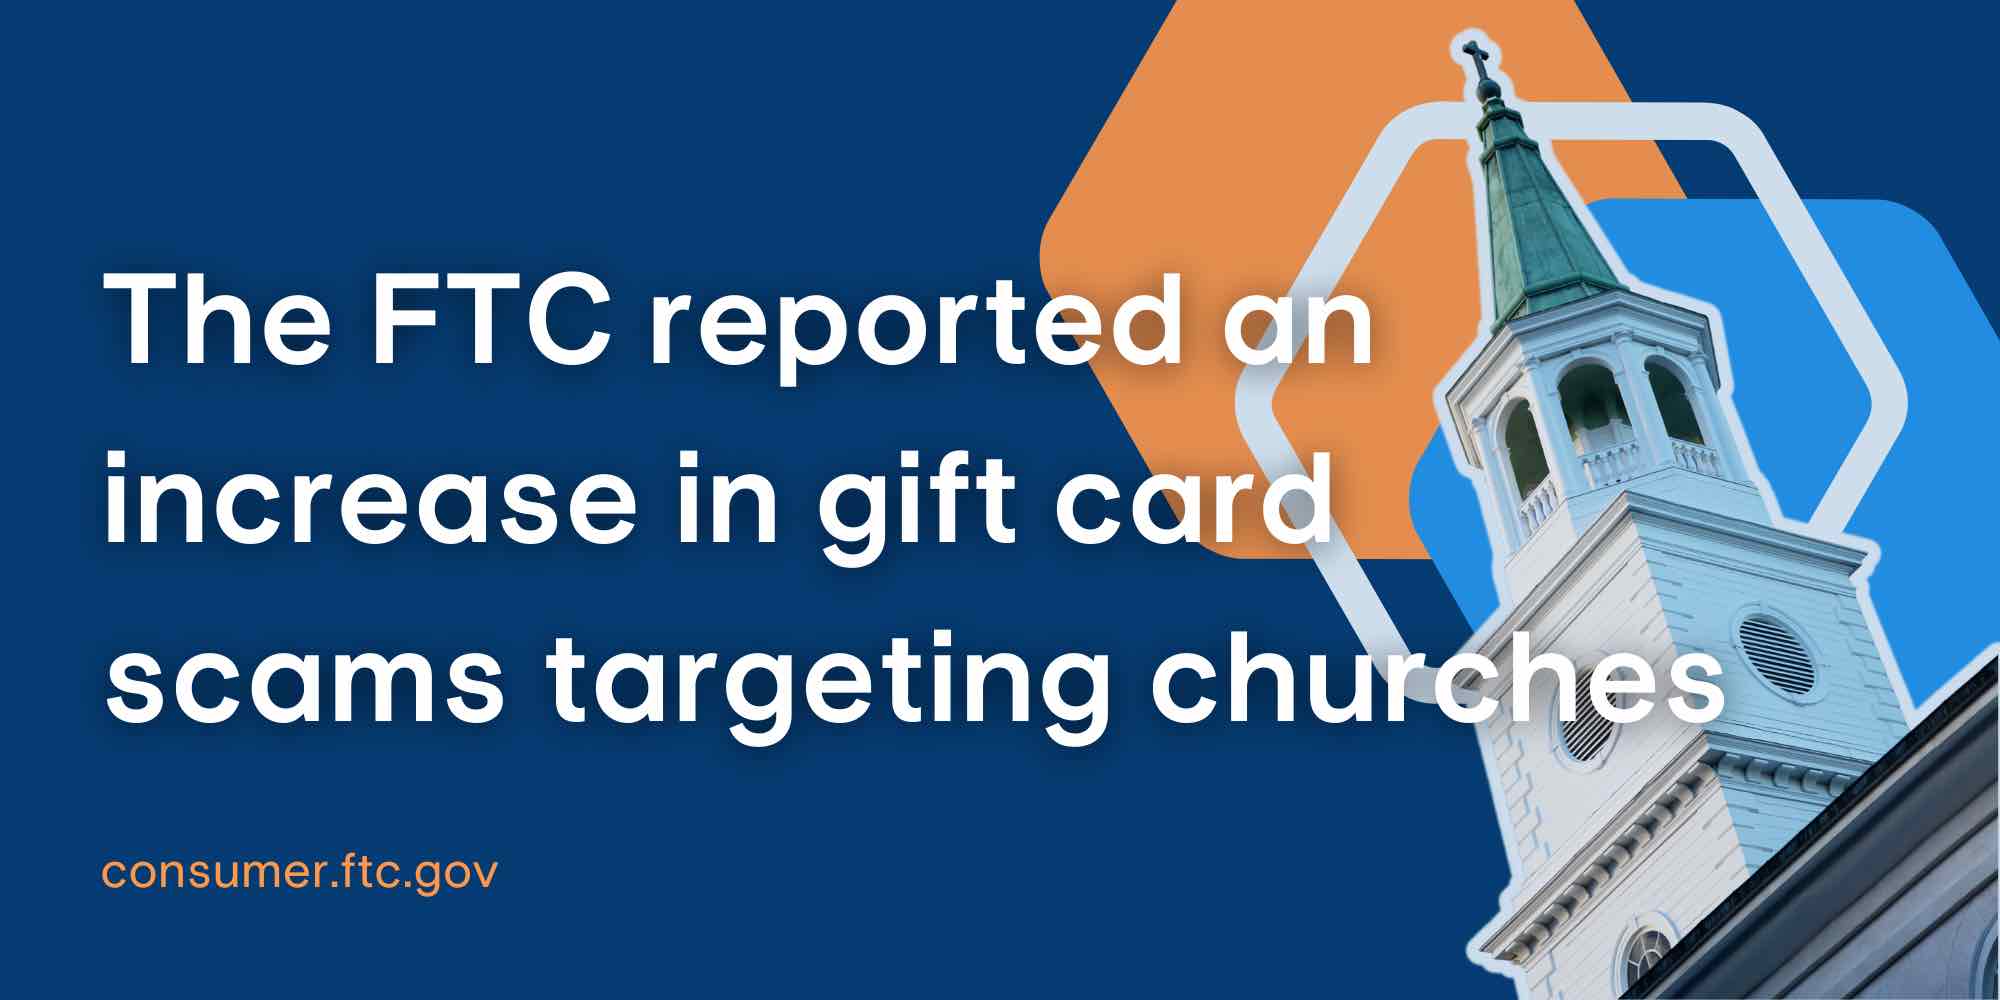 The FTC recently reported an increase in churches target by scammers